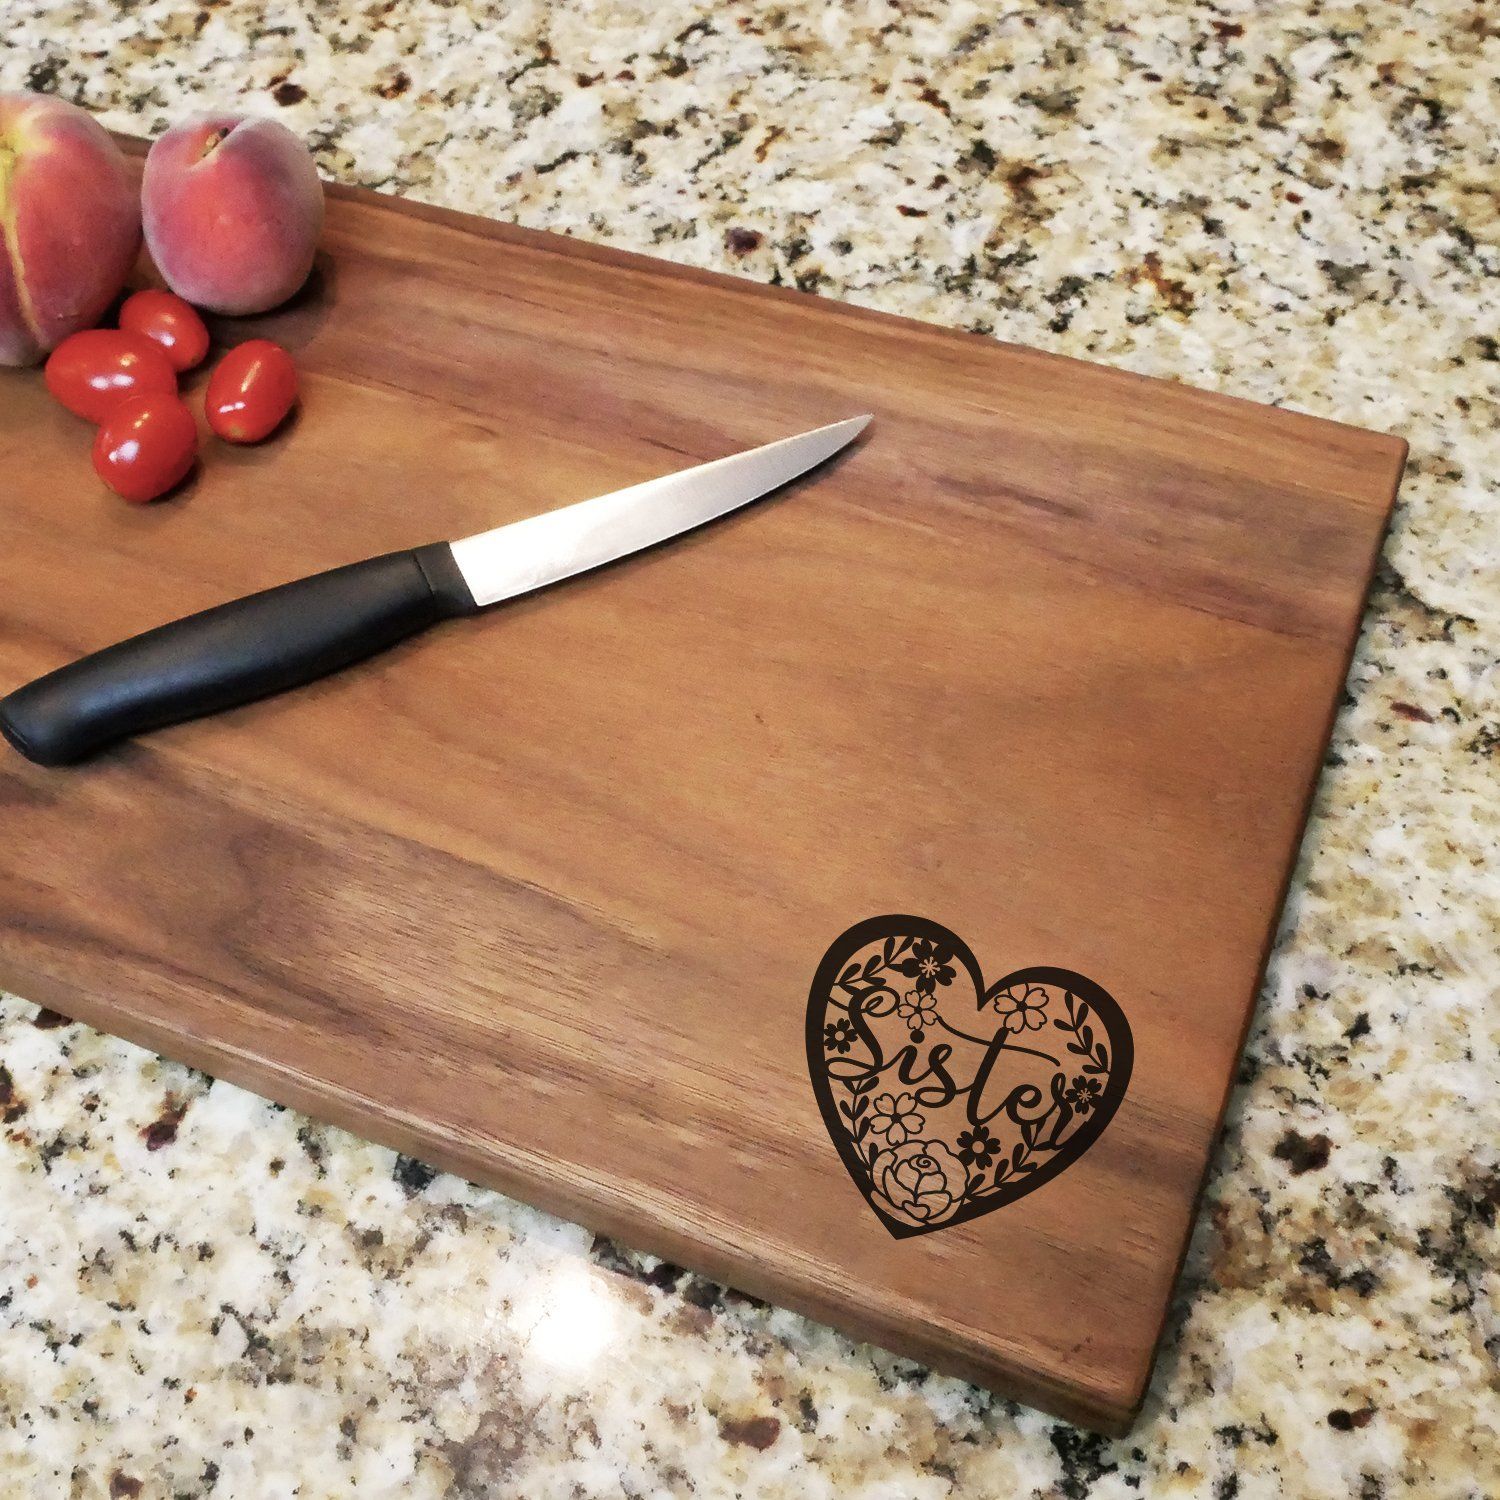 https://cdn.shopify.com/s/files/1/0147/5490/6198/products/sister-floral-heart-engraved-walnut-cutting-board-11-x-16-281892.jpg?v=1628780782